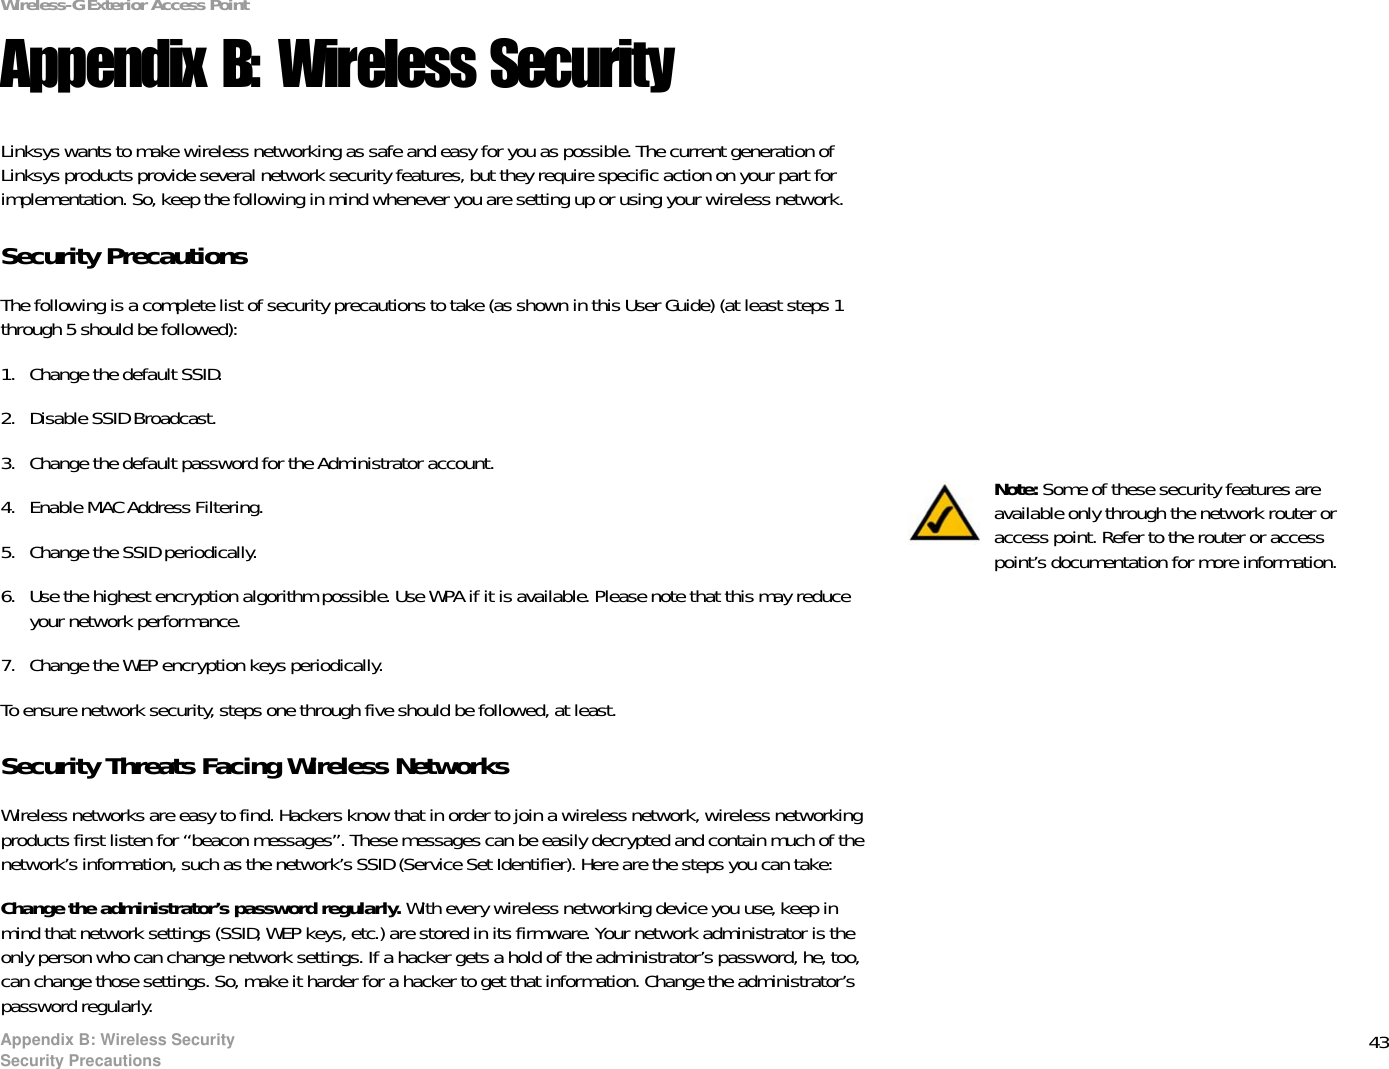 43Appendix B: Wireless SecuritySecurity PrecautionsWireless-G Exterior Access PointAppendix B: Wireless SecurityLinksys wants to make wireless networking as safe and easy for you as possible. The current generation of Linksys products provide several network security features, but they require specific action on your part for implementation. So, keep the following in mind whenever you are setting up or using your wireless network.Security PrecautionsThe following is a complete list of security precautions to take (as shown in this User Guide) (at least steps 1 through 5 should be followed):1. Change the default SSID. 2. Disable SSID Broadcast. 3. Change the default password for the Administrator account. 4. Enable MAC Address Filtering. 5. Change the SSID periodically. 6. Use the highest encryption algorithm possible. Use WPA if it is available. Please note that this may reduce your network performance. 7. Change the WEP encryption keys periodically. To ensure network security, steps one through five should be followed, at least.Security Threats Facing Wireless Networks Wireless networks are easy to find. Hackers know that in order to join a wireless network, wireless networking products first listen for “beacon messages”. These messages can be easily decrypted and contain much of the network’s information, such as the network’s SSID (Service Set Identifier). Here are the steps you can take:Change the administrator’s password regularly. With every wireless networking device you use, keep in mind that network settings (SSID, WEP keys, etc.) are stored in its firmware. Your network administrator is the only person who can change network settings. If a hacker gets a hold of the administrator’s password, he, too, can change those settings. So, make it harder for a hacker to get that information. Change the administrator’s password regularly.Note: Some of these security features are available only through the network router or access point. Refer to the router or access point’s documentation for more information.